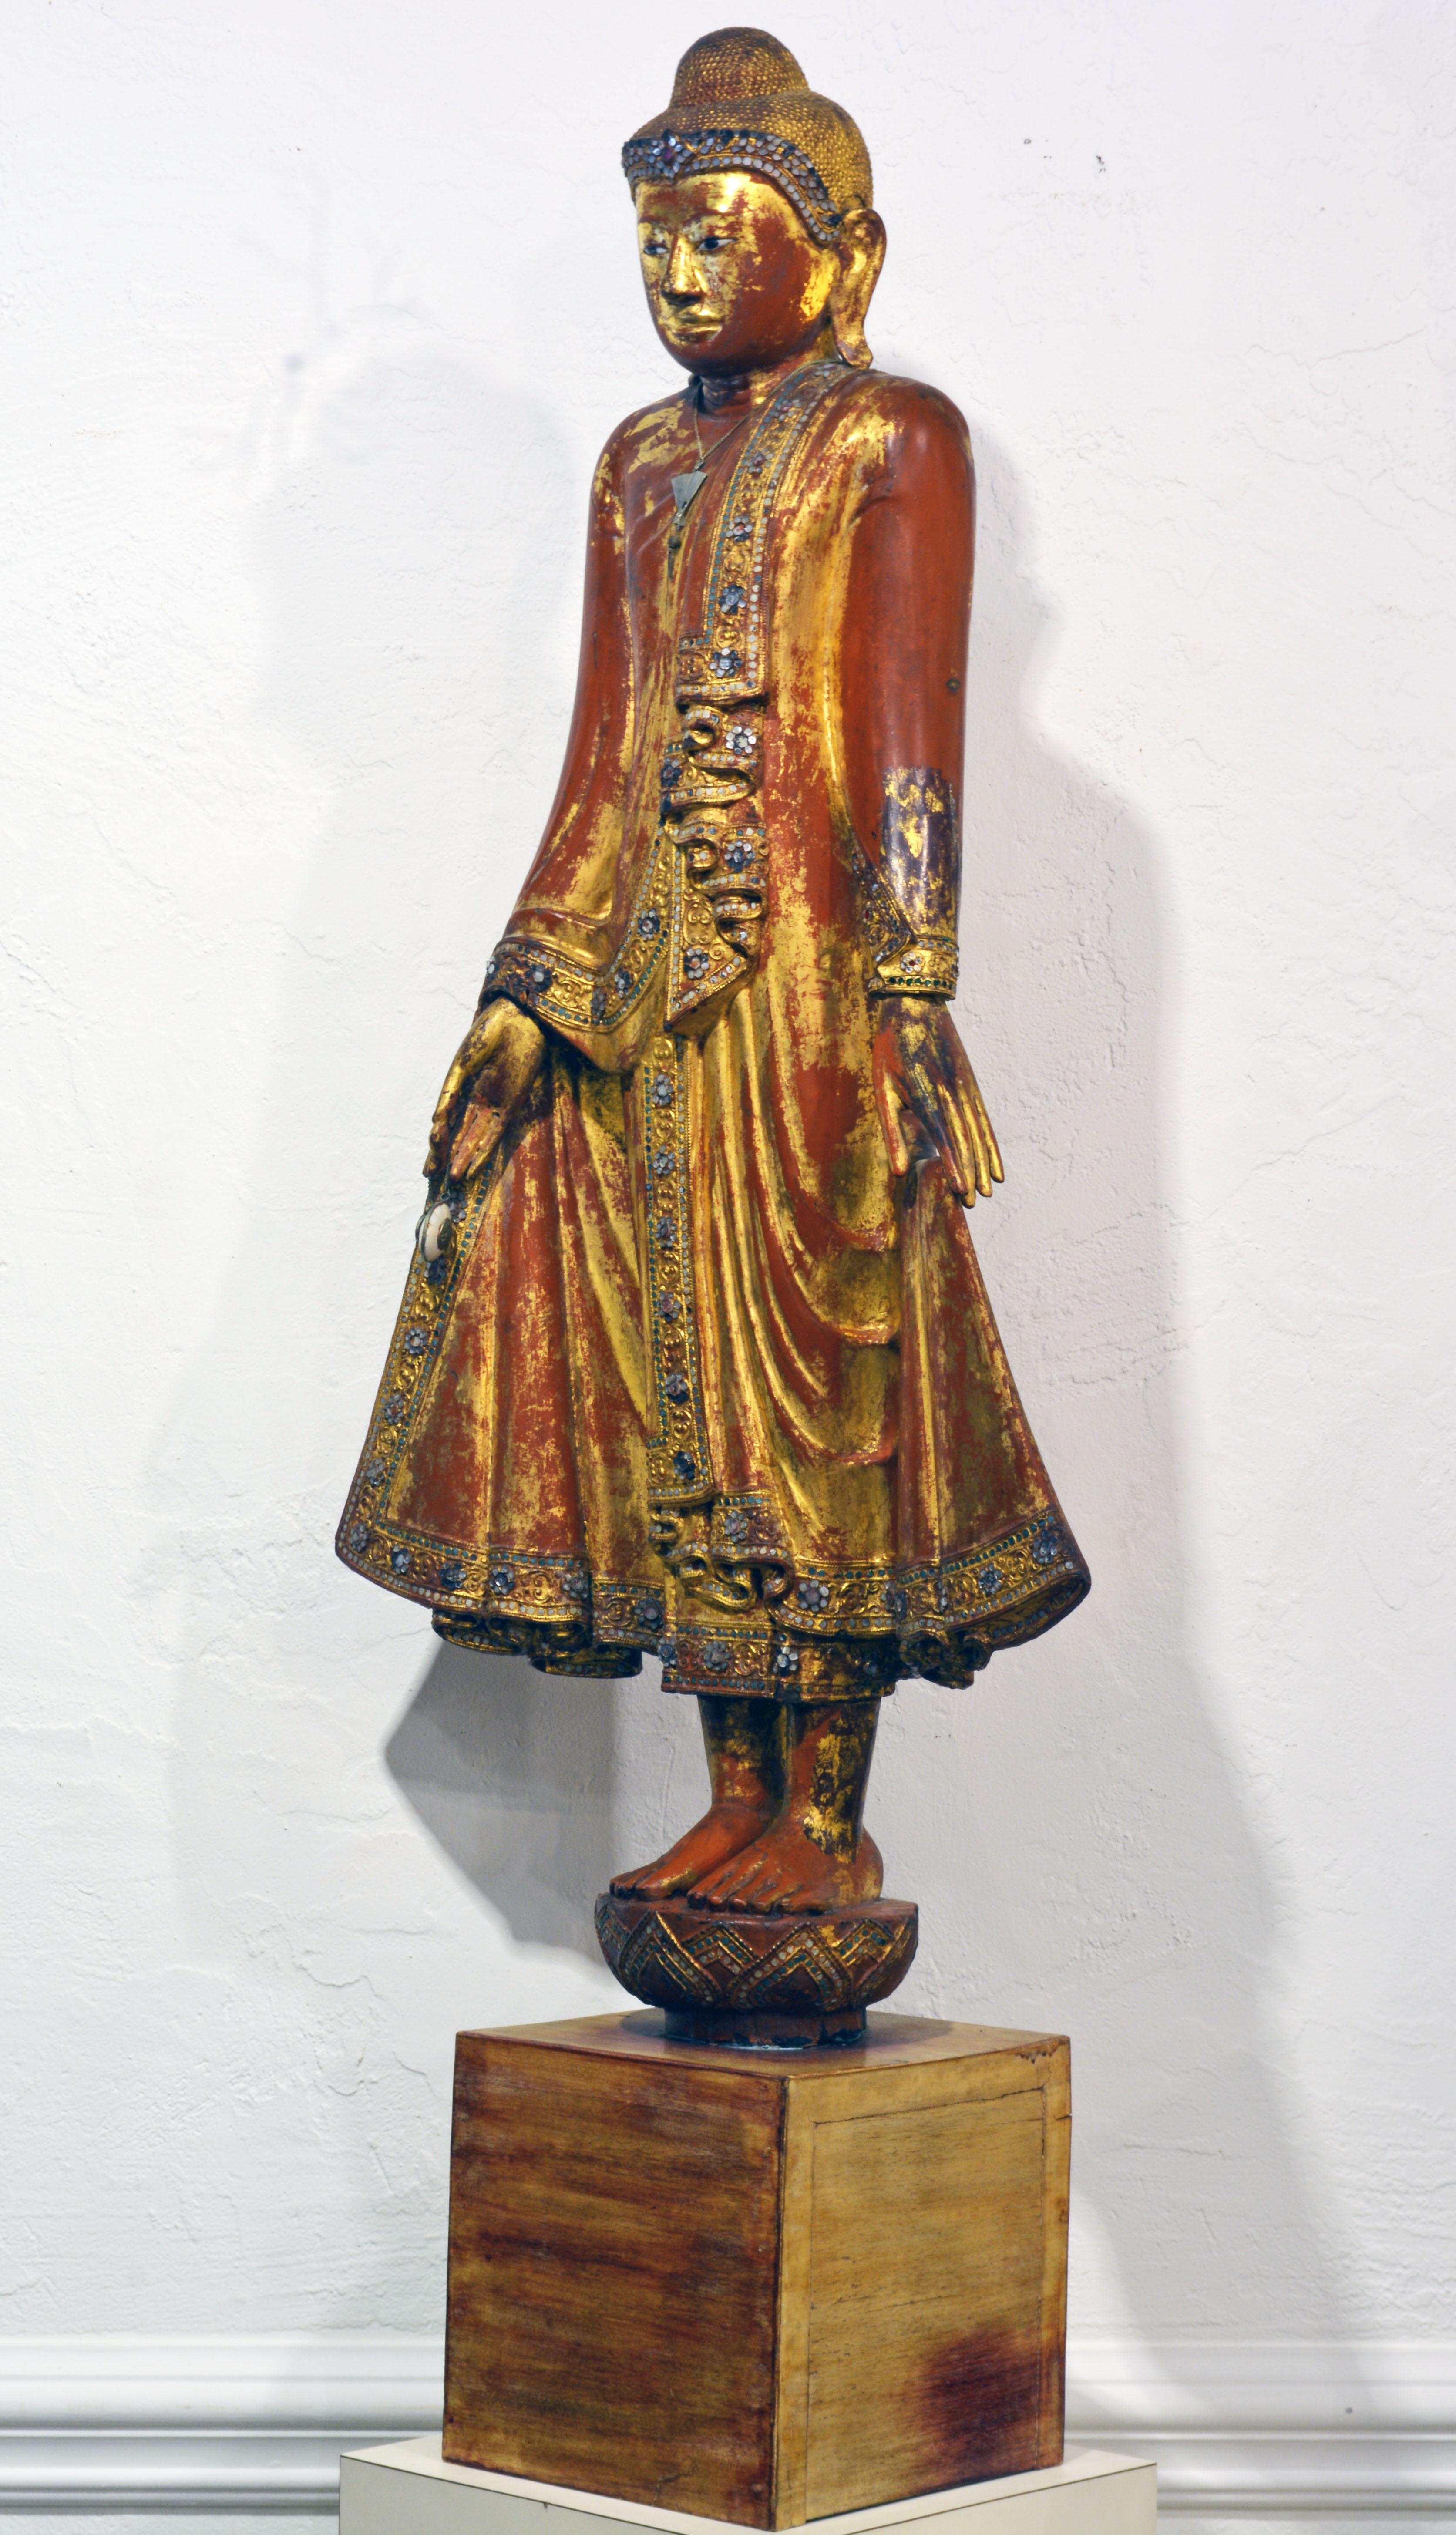 A superior 50 inches tall carved lacquer and gilt statue of the Mandalay style Shakyamuni Buddha (Myanmar) standing on a stylized lotus flower and wearing princely bejeweled robes. The beautifully carved face with porcelain or glass eyes. Standing